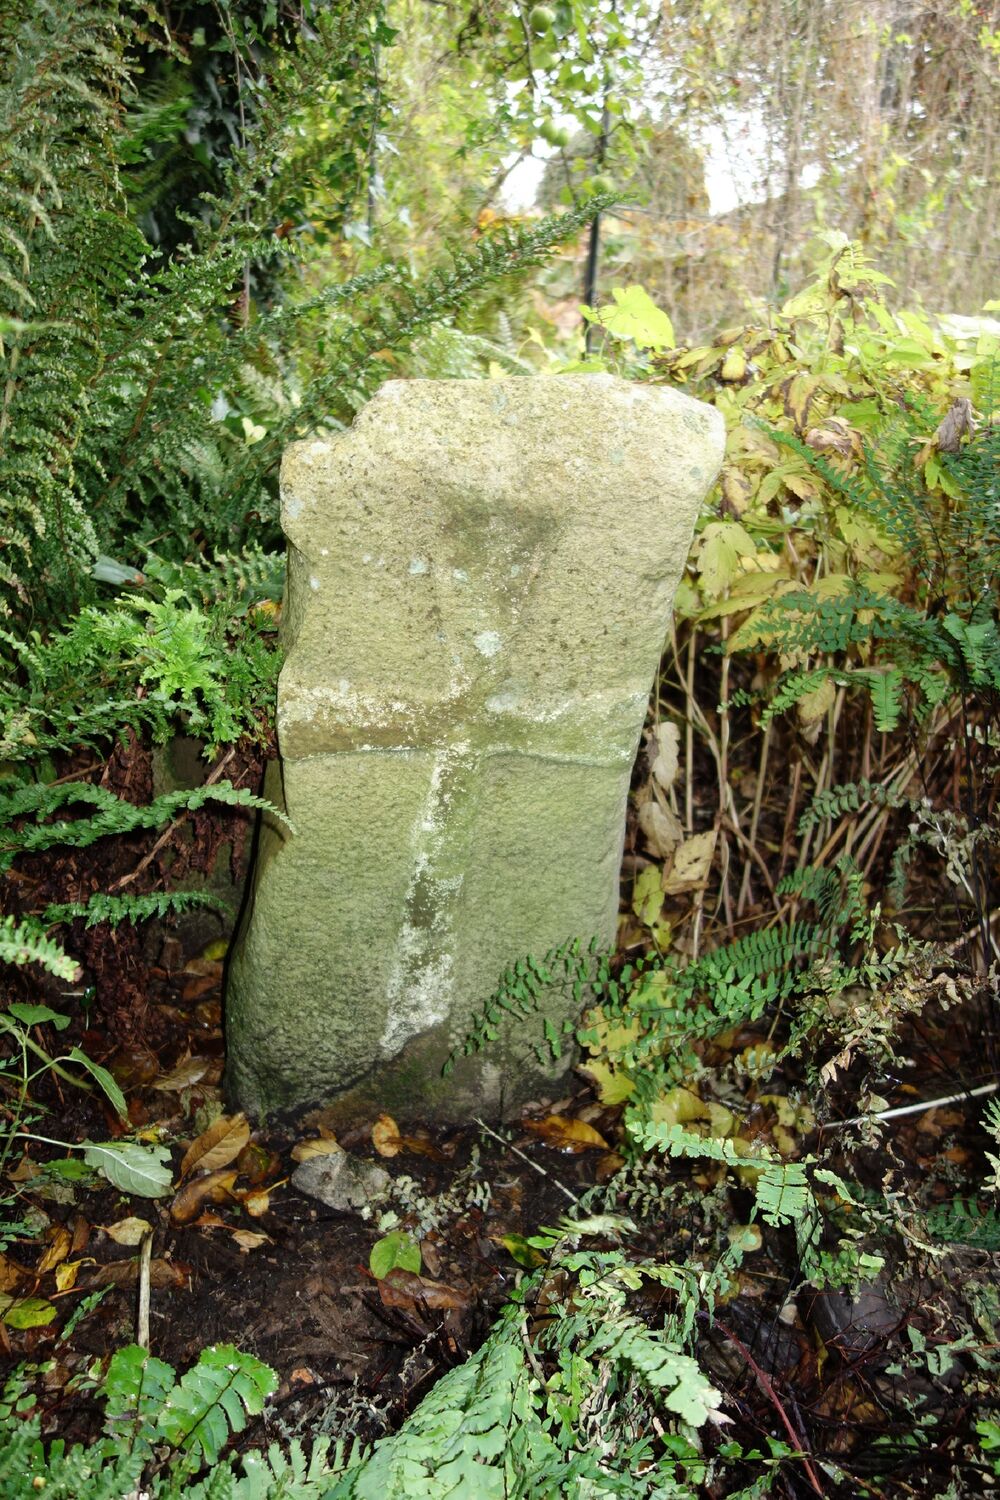 A tall rectangular slab of stone stands, at a slight angle, in a garden area, surrounded by fallen leaves and ferns. On the slab is a faded image of a Celtic-type cross.